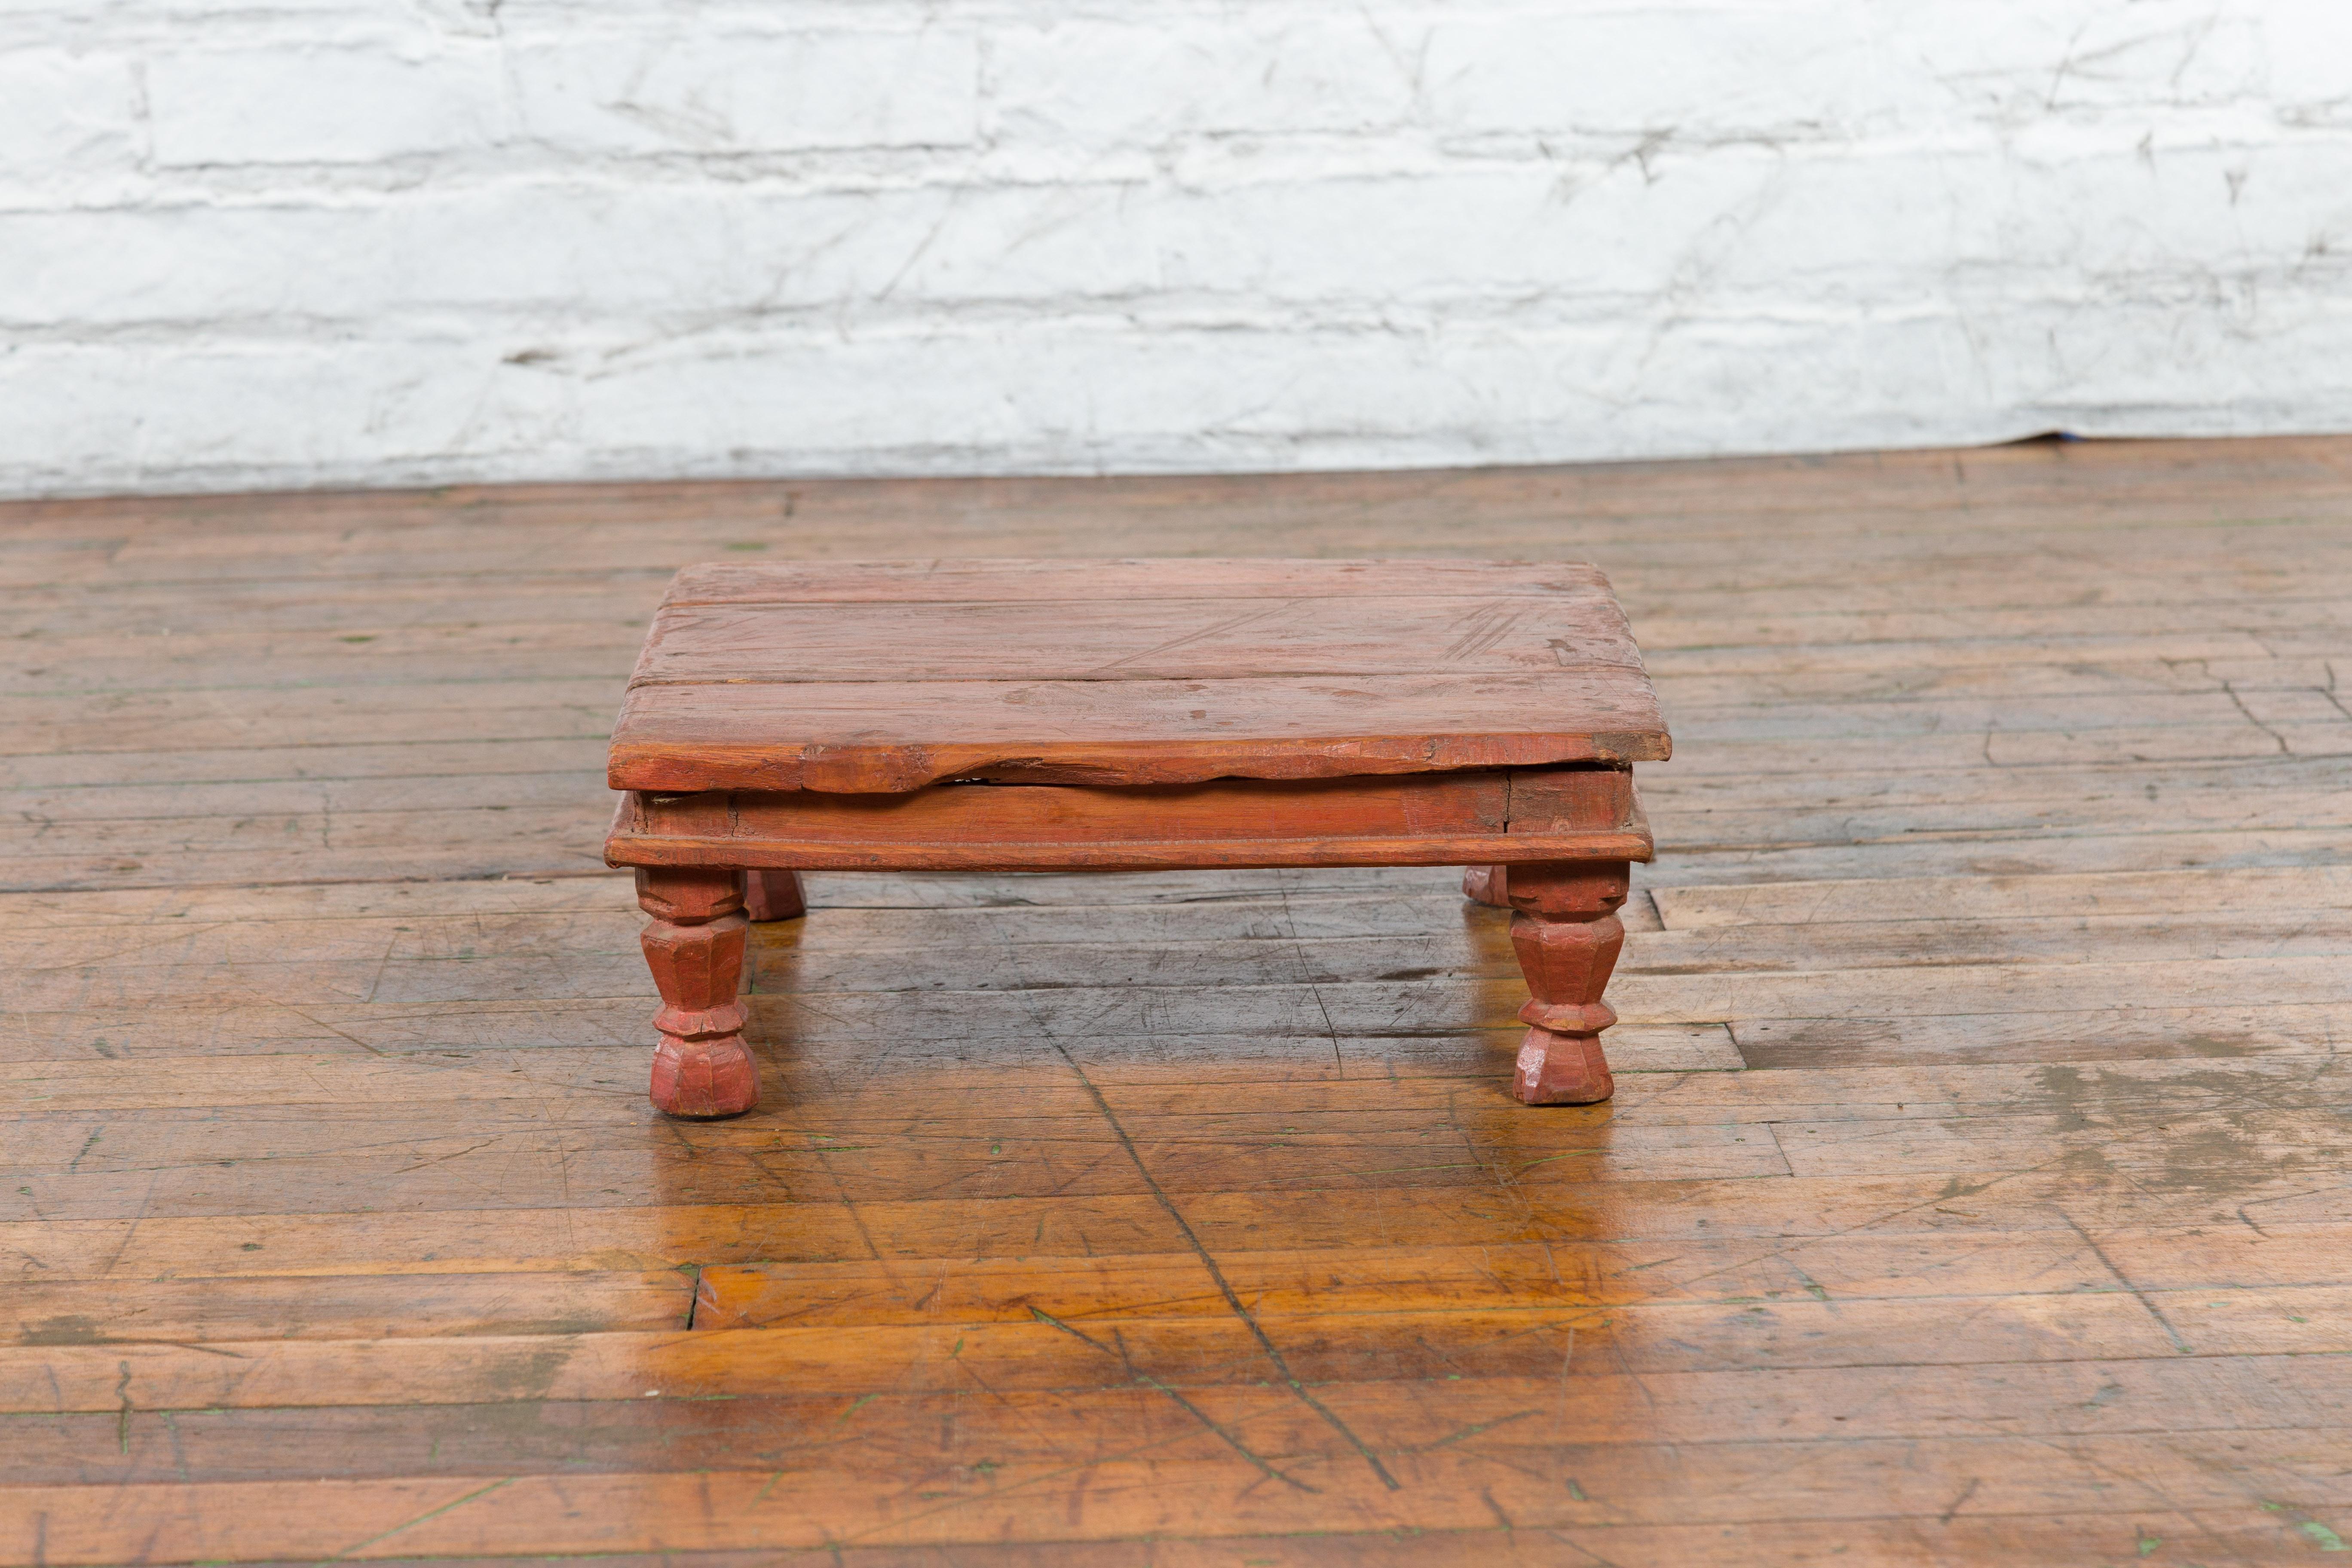 Antique Indian Low Wooden Prayer Table Stand with Carved Angular Legs For Sale 2